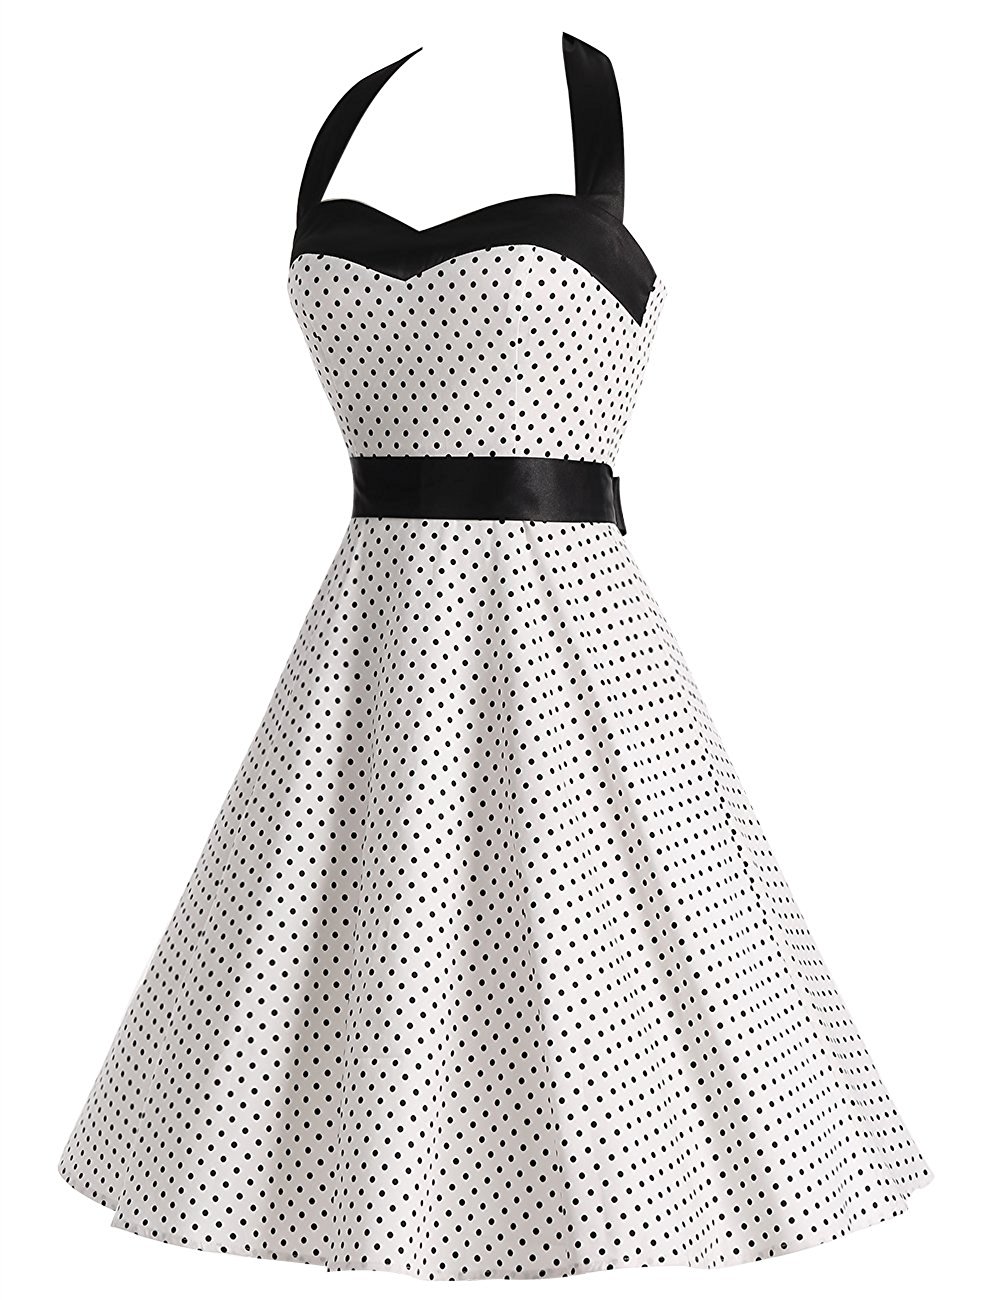 50s Vintage Style Halter White Polka Dots Ruched Retro Dress on Luulla